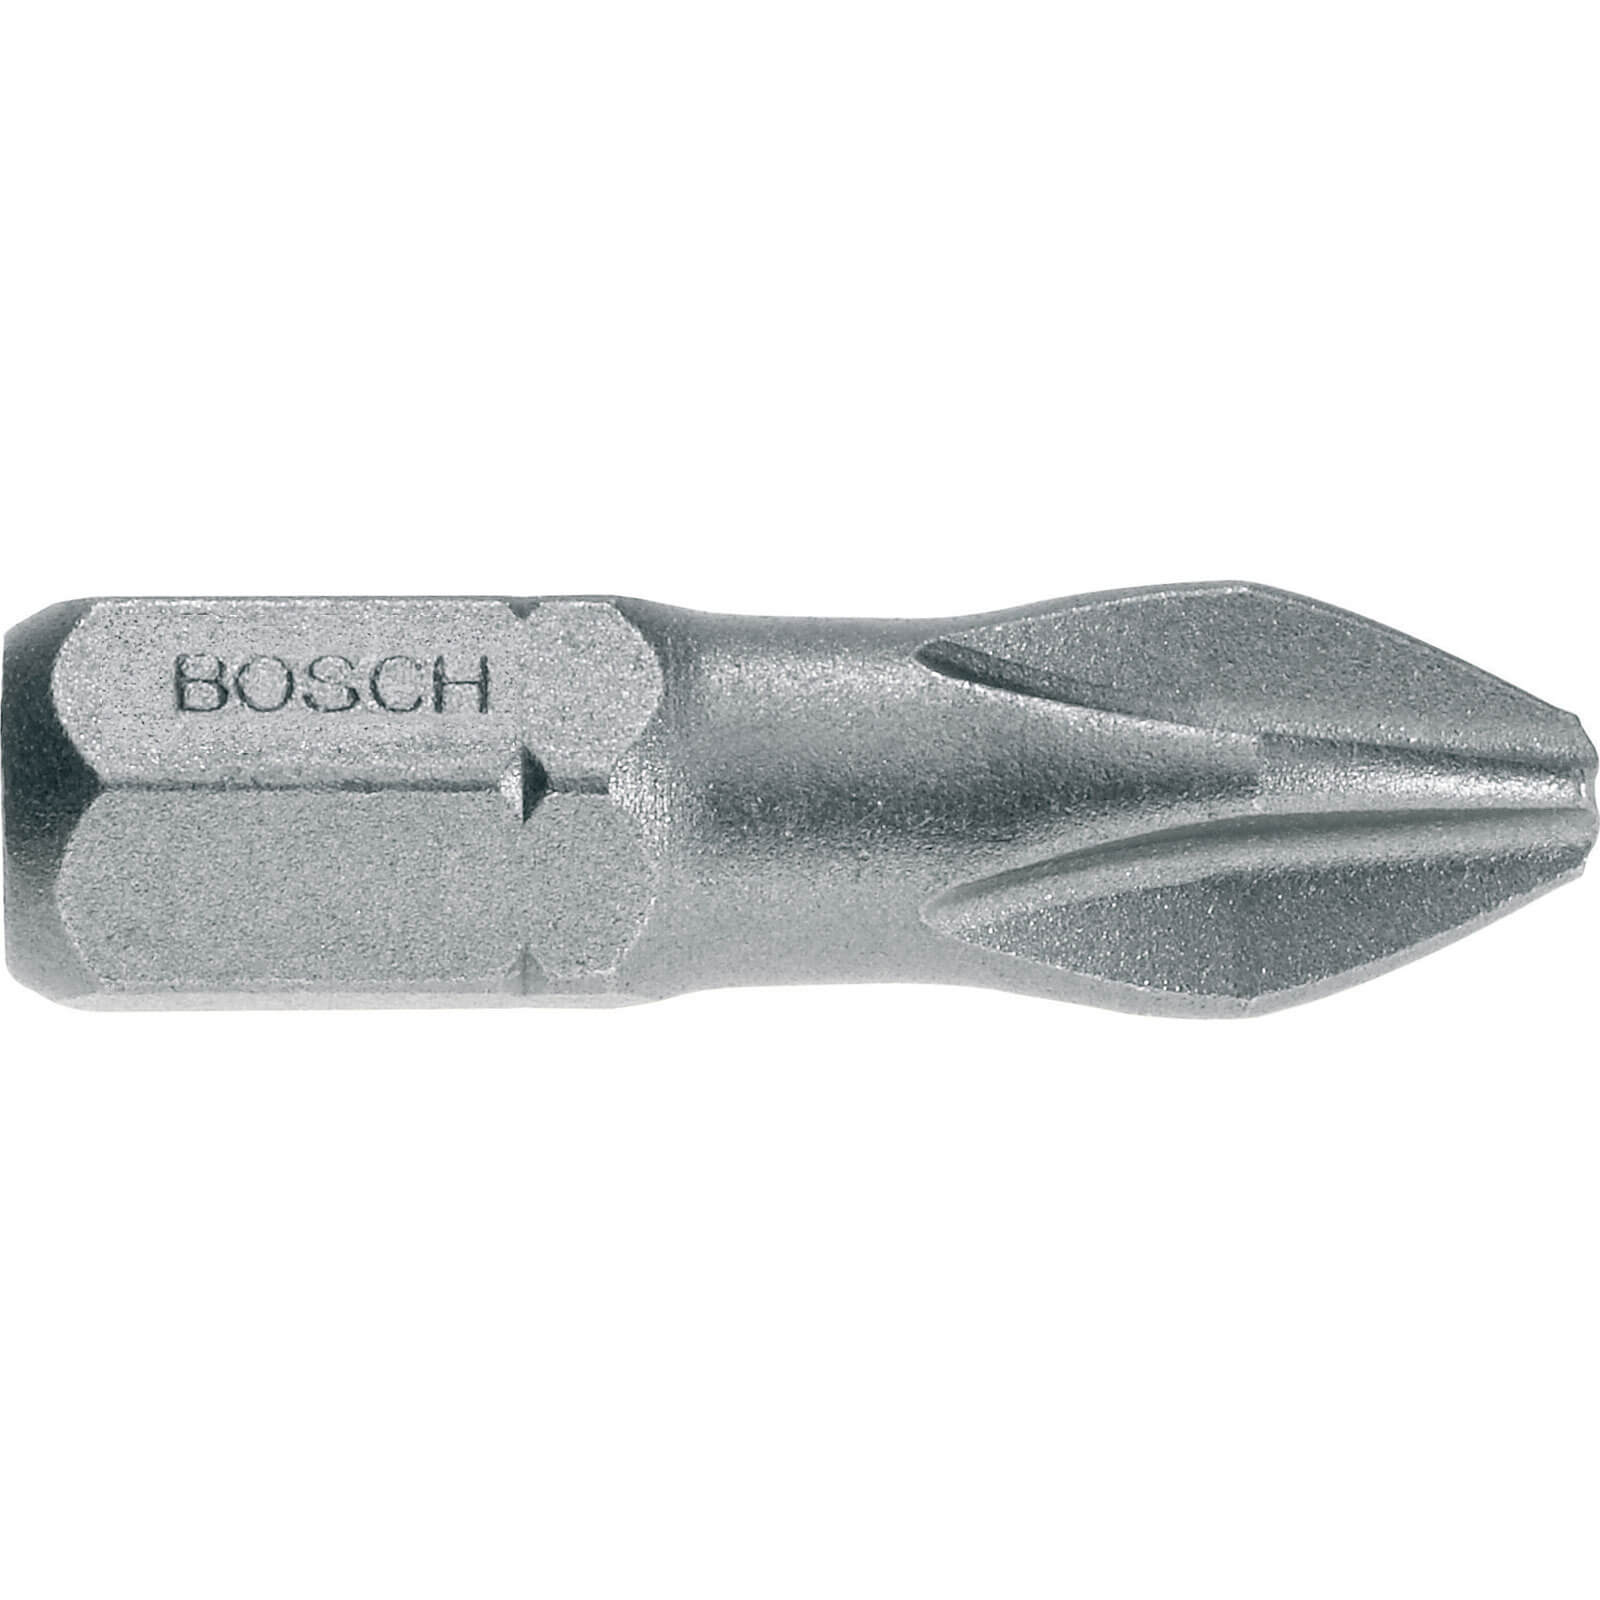 Image of Bosch PH2 Tic Tac Box Extra Hard Phillips Screwdriver Bits PZ2 25mm Pack of 25